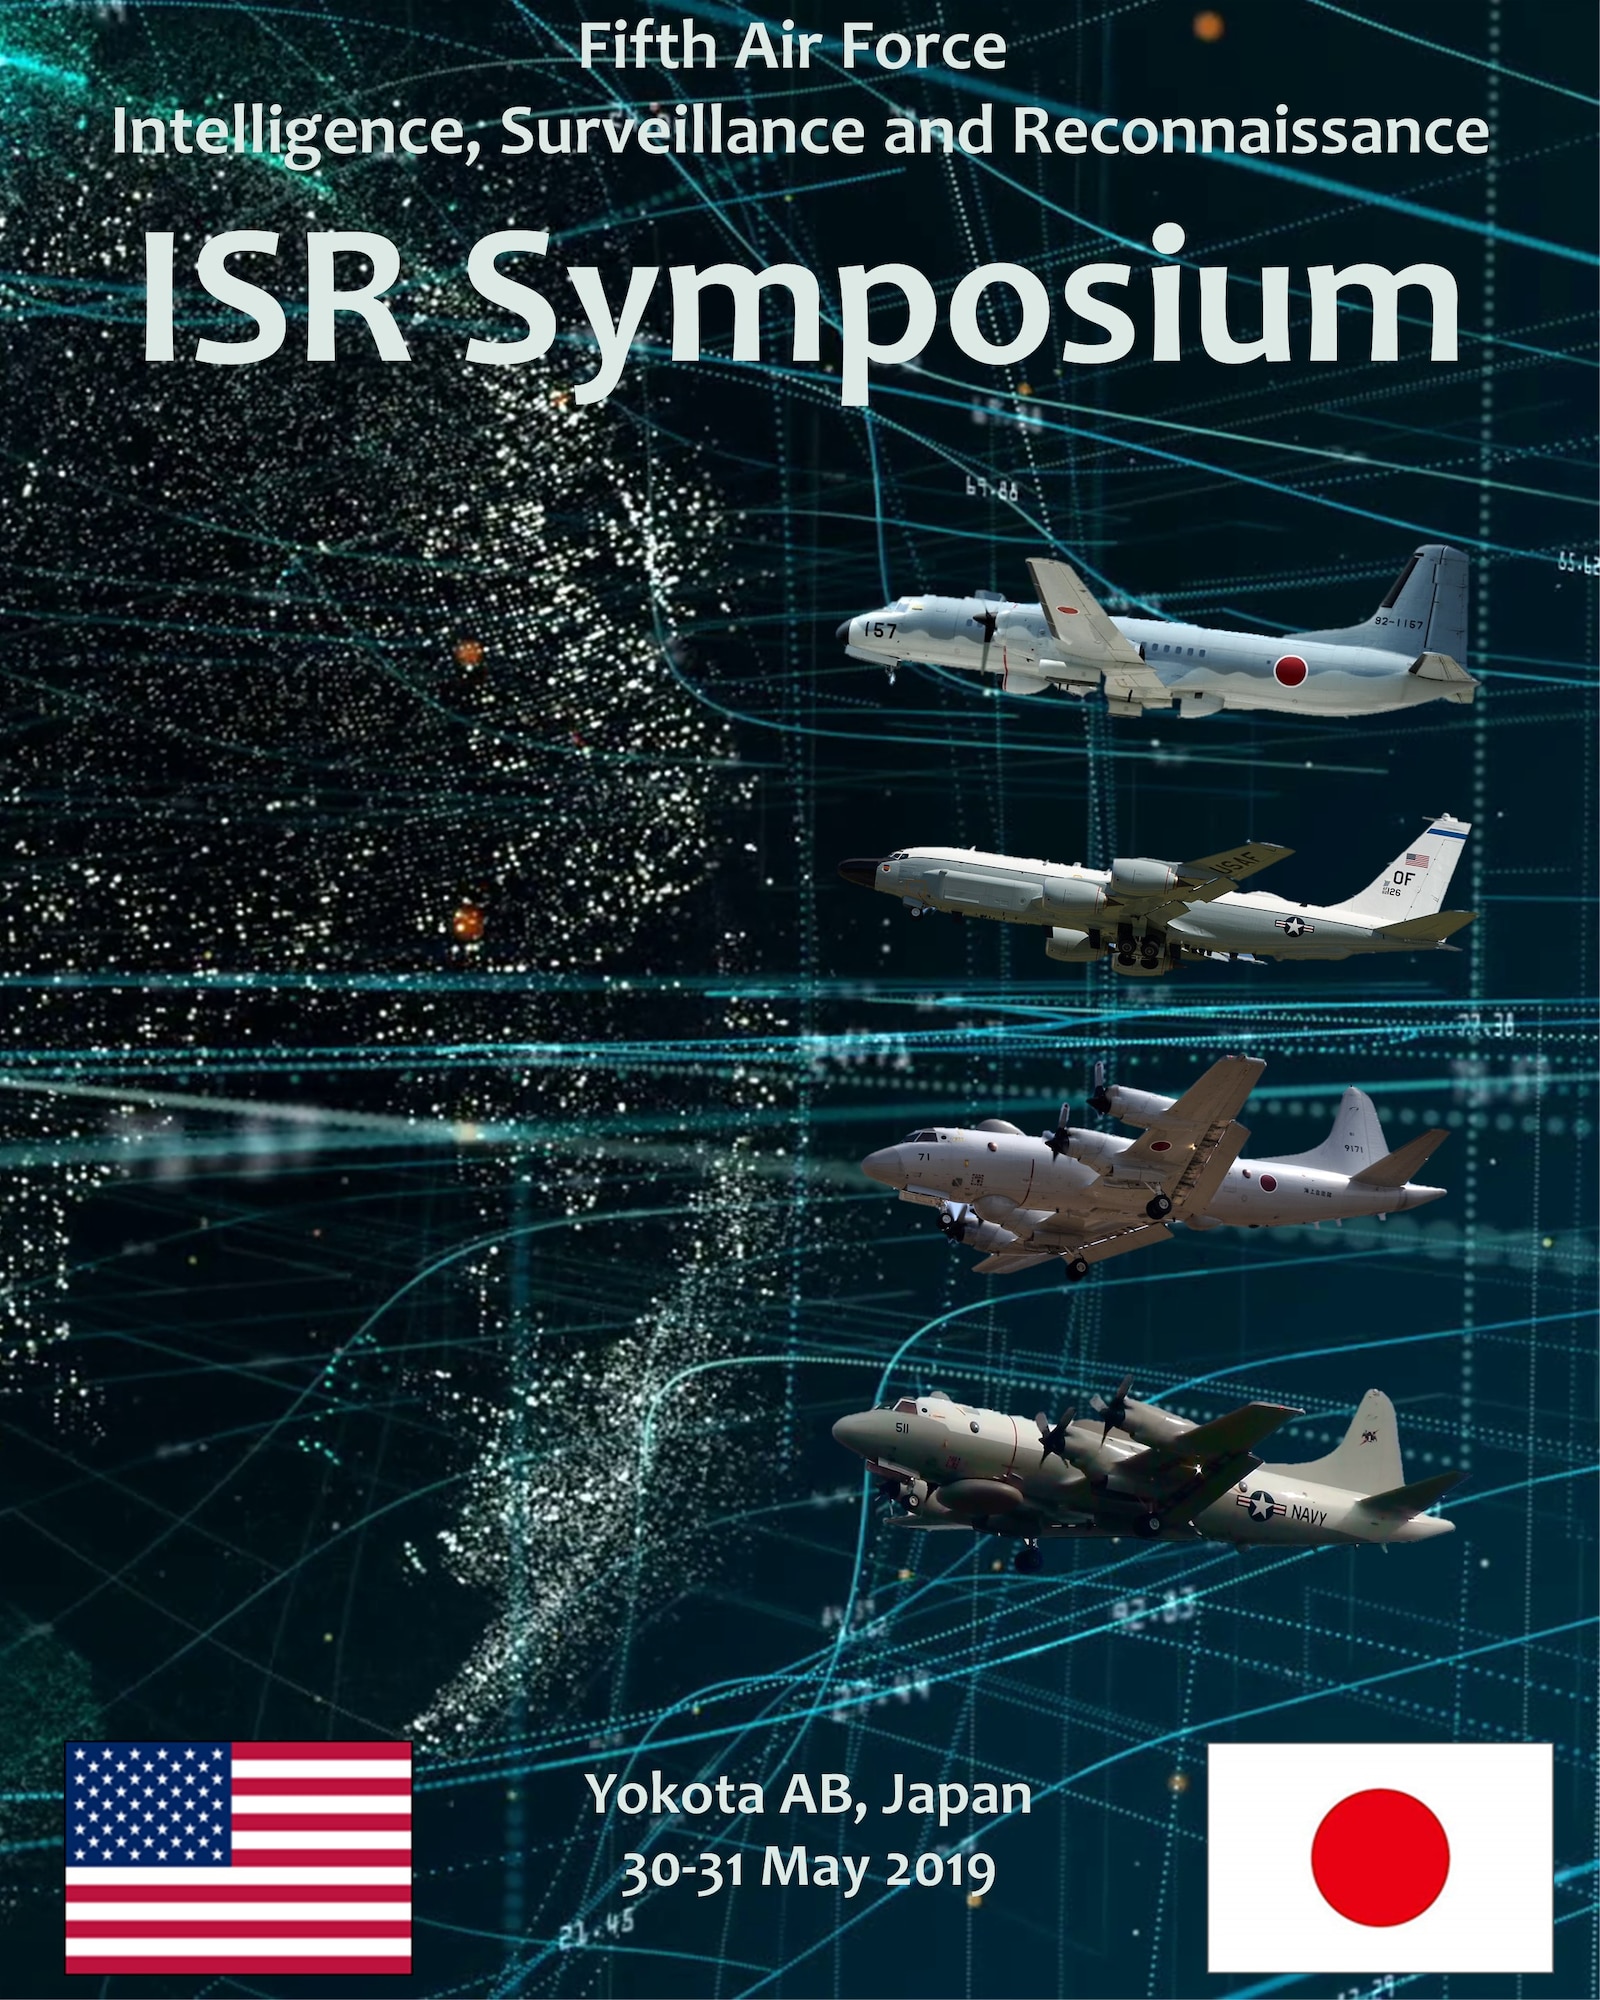 Intelligence, Surveillance and Reconnaissance personnel from 22 organizations across the Indo-Pacific theater including U.S. Air Force, U.S. Navy, and Japan’s Air, Maritime, and Ground Self-Defense Forces attended the inaugural Fifth Air Force joint, bilateral ISR symposium, Yokota Air Base, May 30-31, 2019.